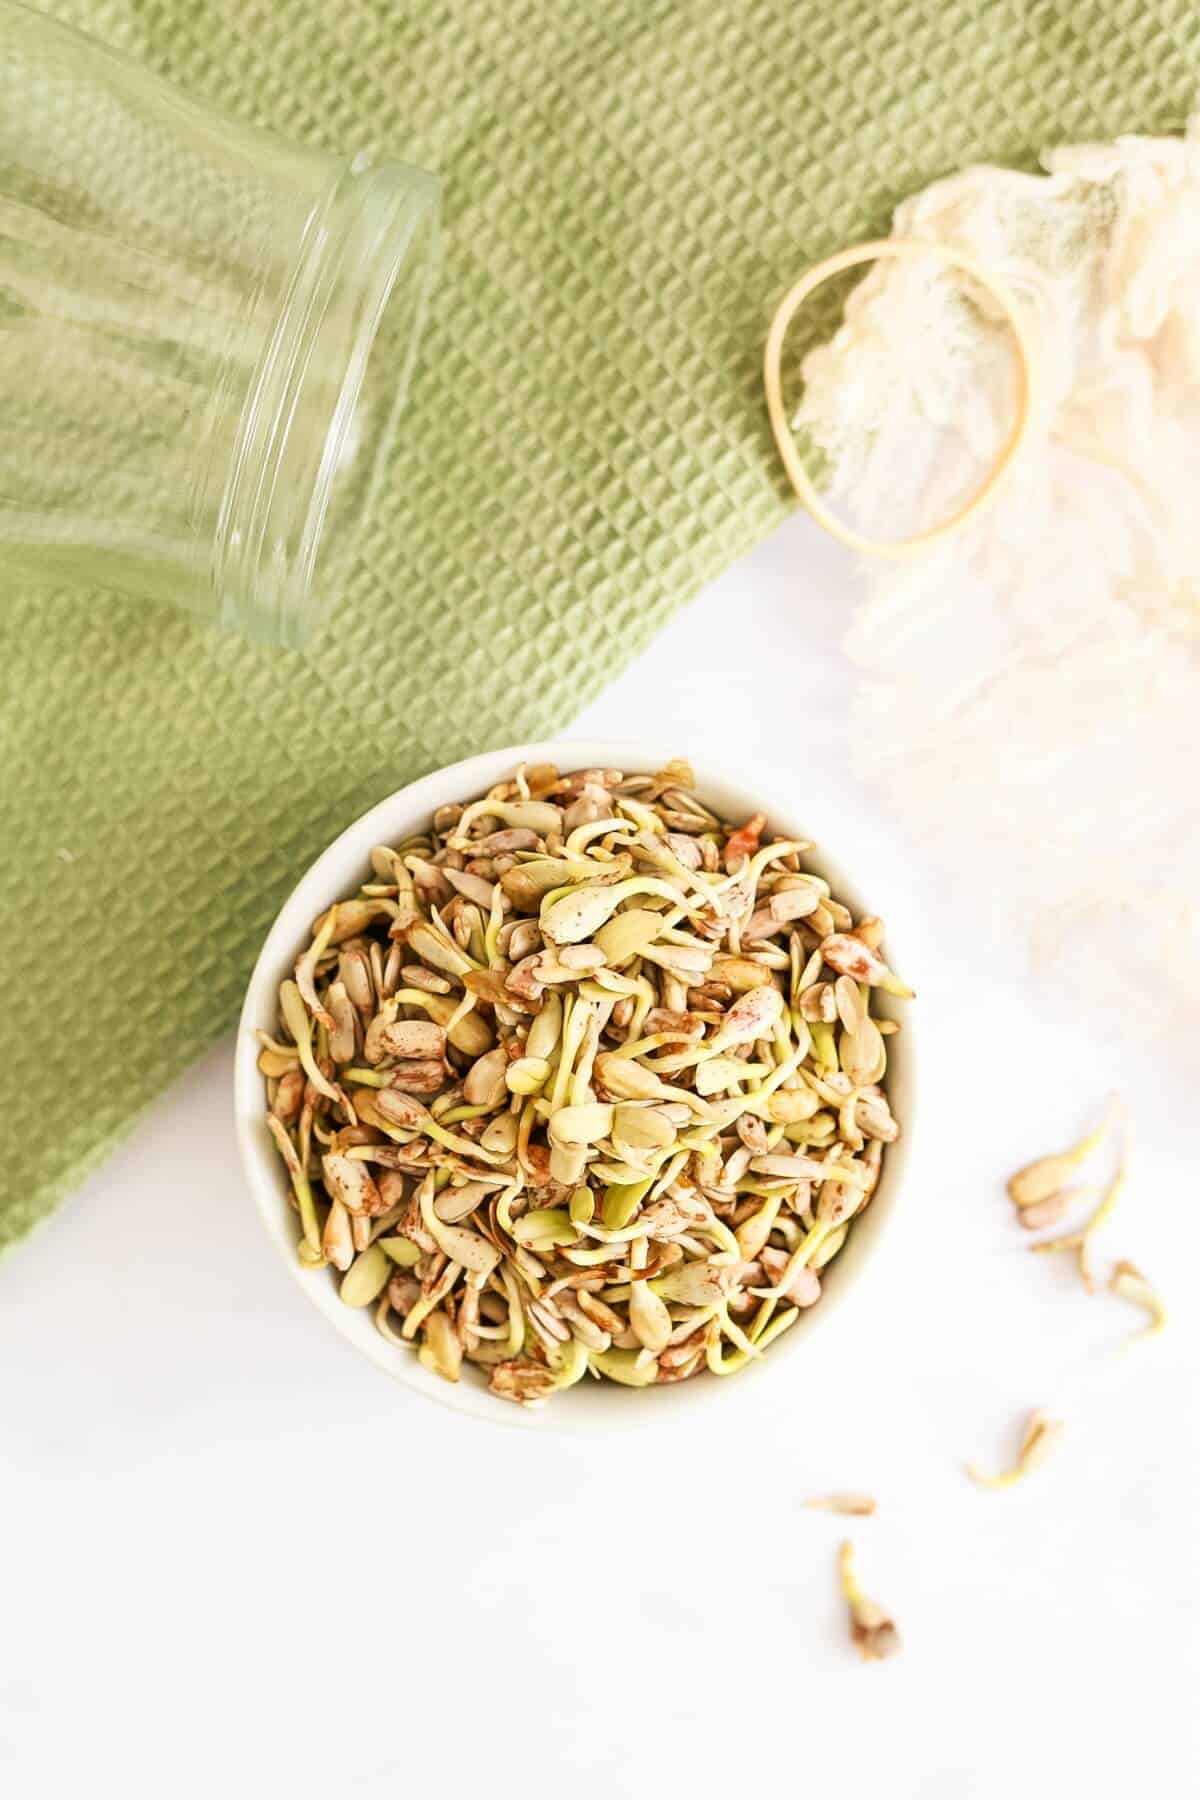 A small dish is filled with sunflower seed sprouts sitting on a white surface with a green kitchen towel, cheesecloth, rubber band and a jar.